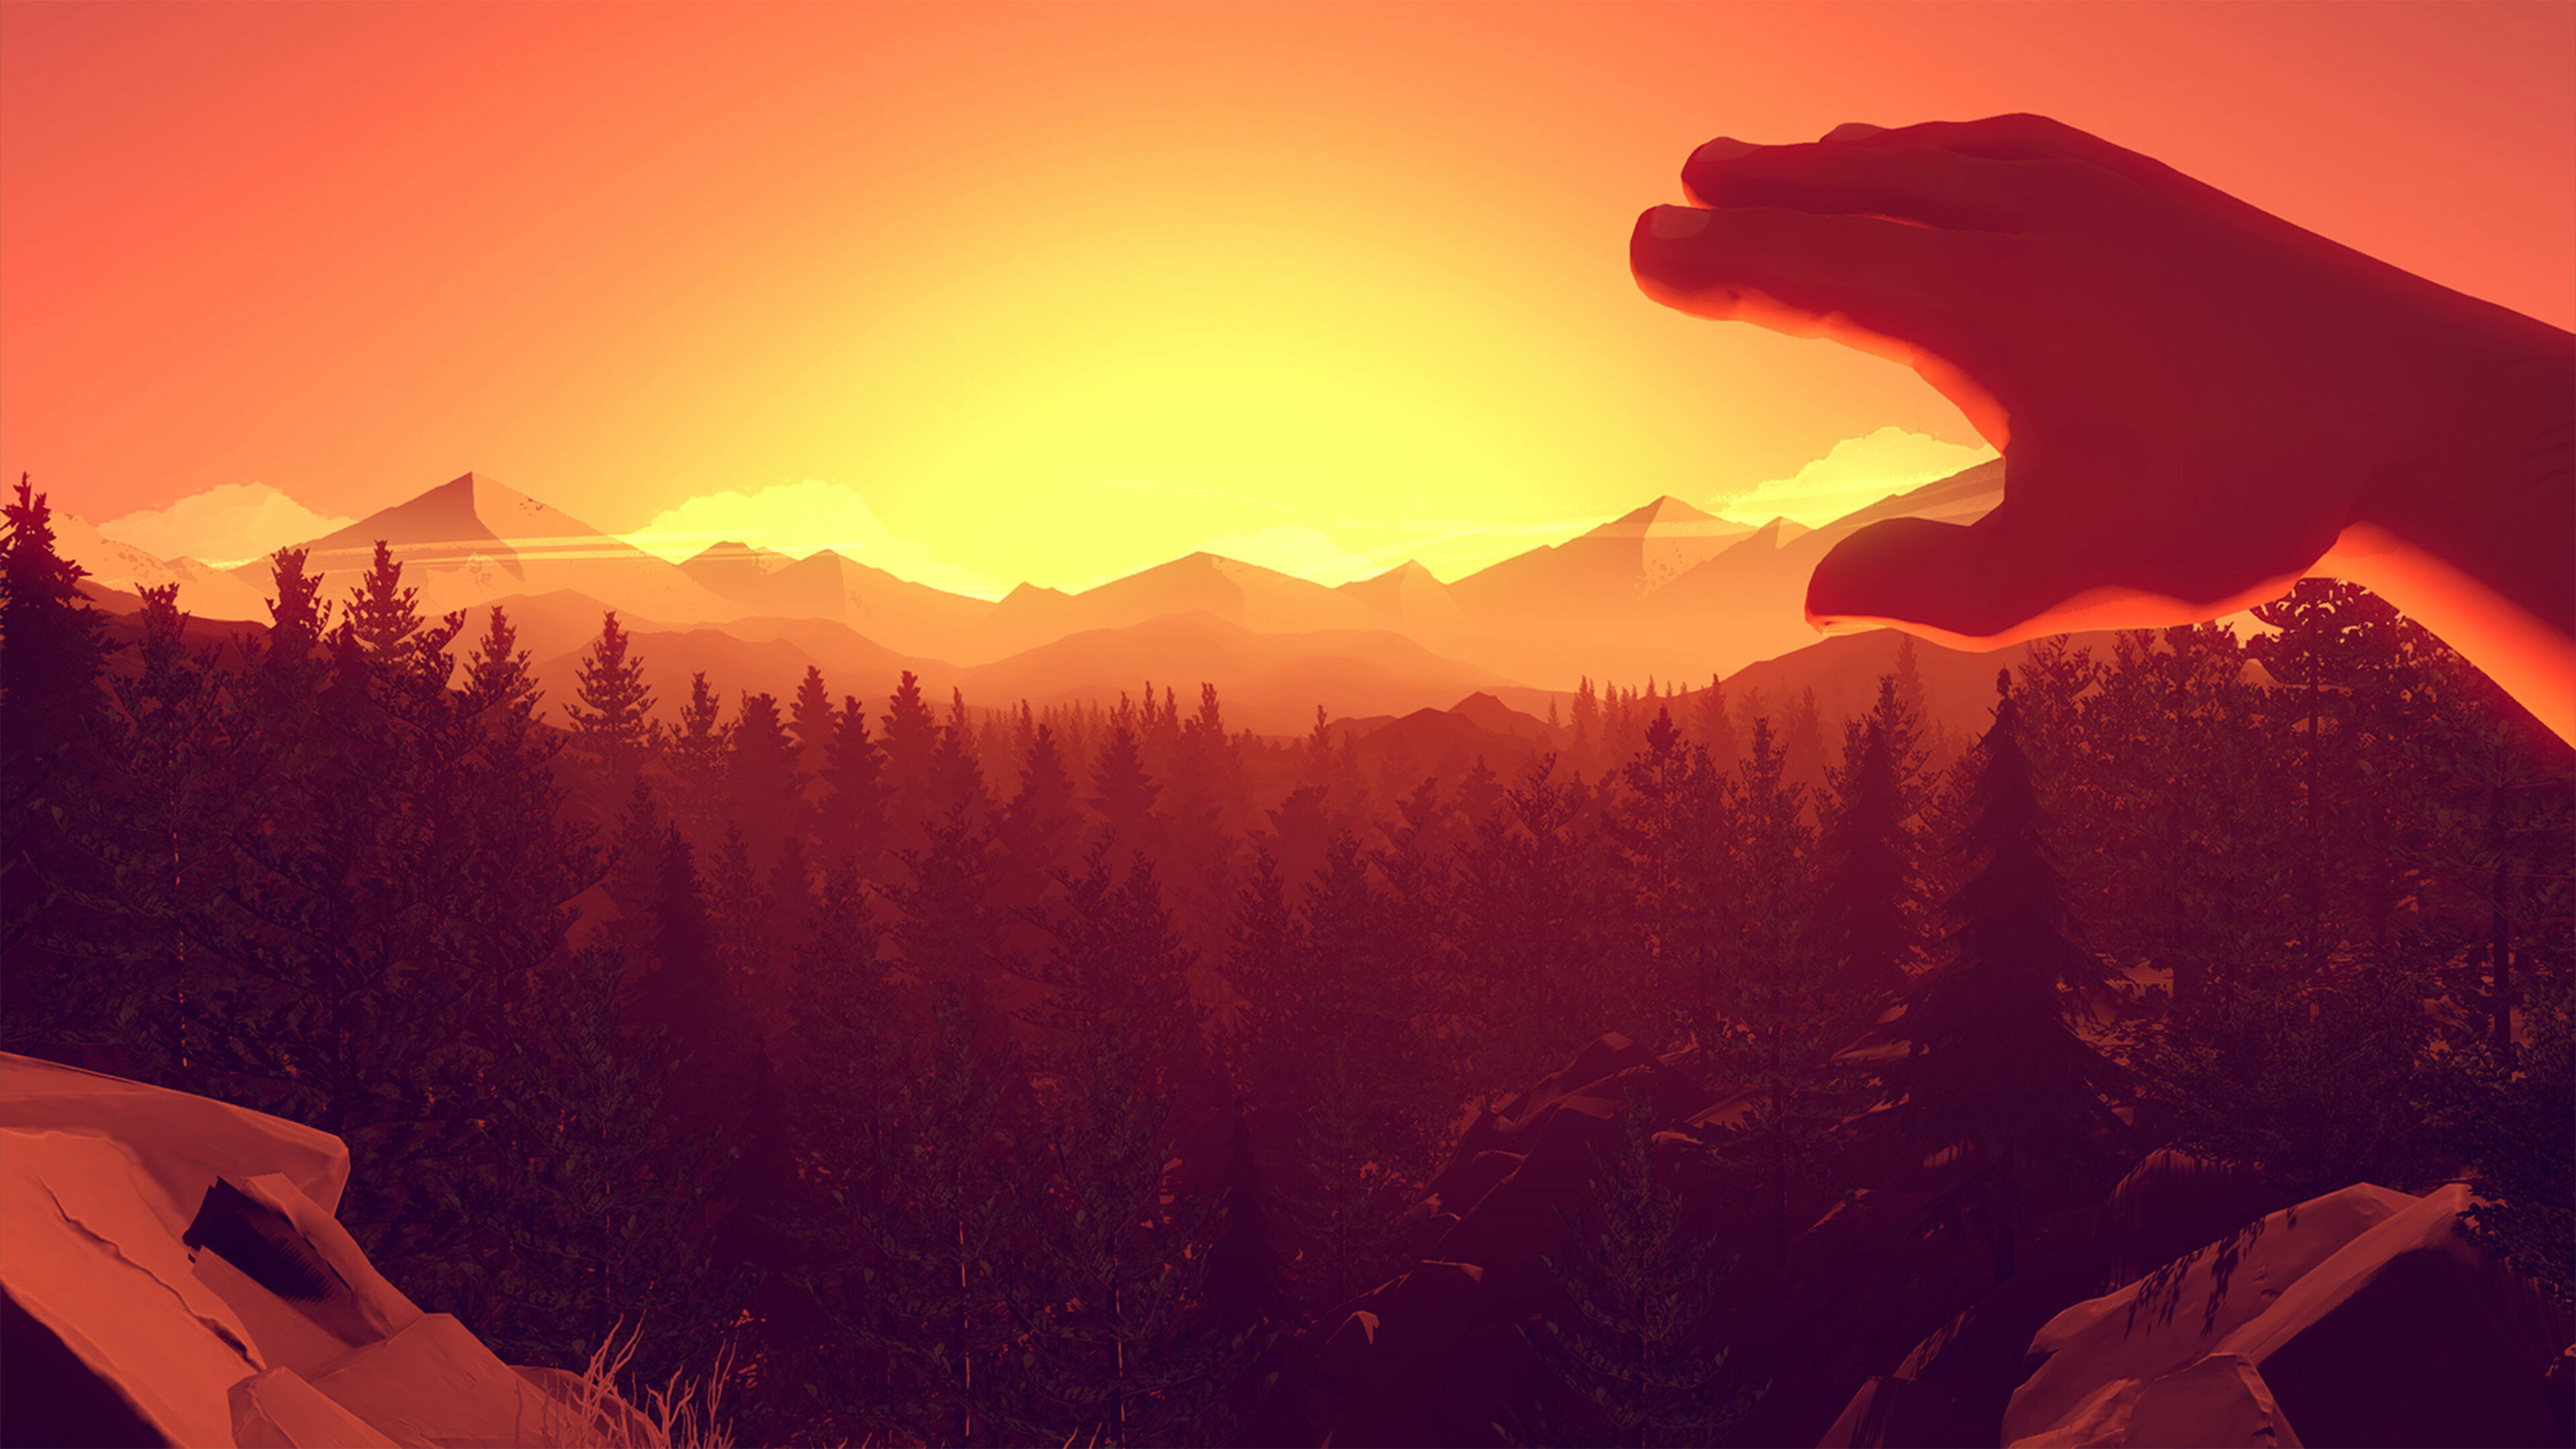 Firewatch: The story follows a fire lookout named Henry who works in Shoshone National Forest, a year after the Yellowstone fires of 1988, A month after his first day at work, strange things begin happening to him and his supervisor Delilah. 3840x2160 4K Background.